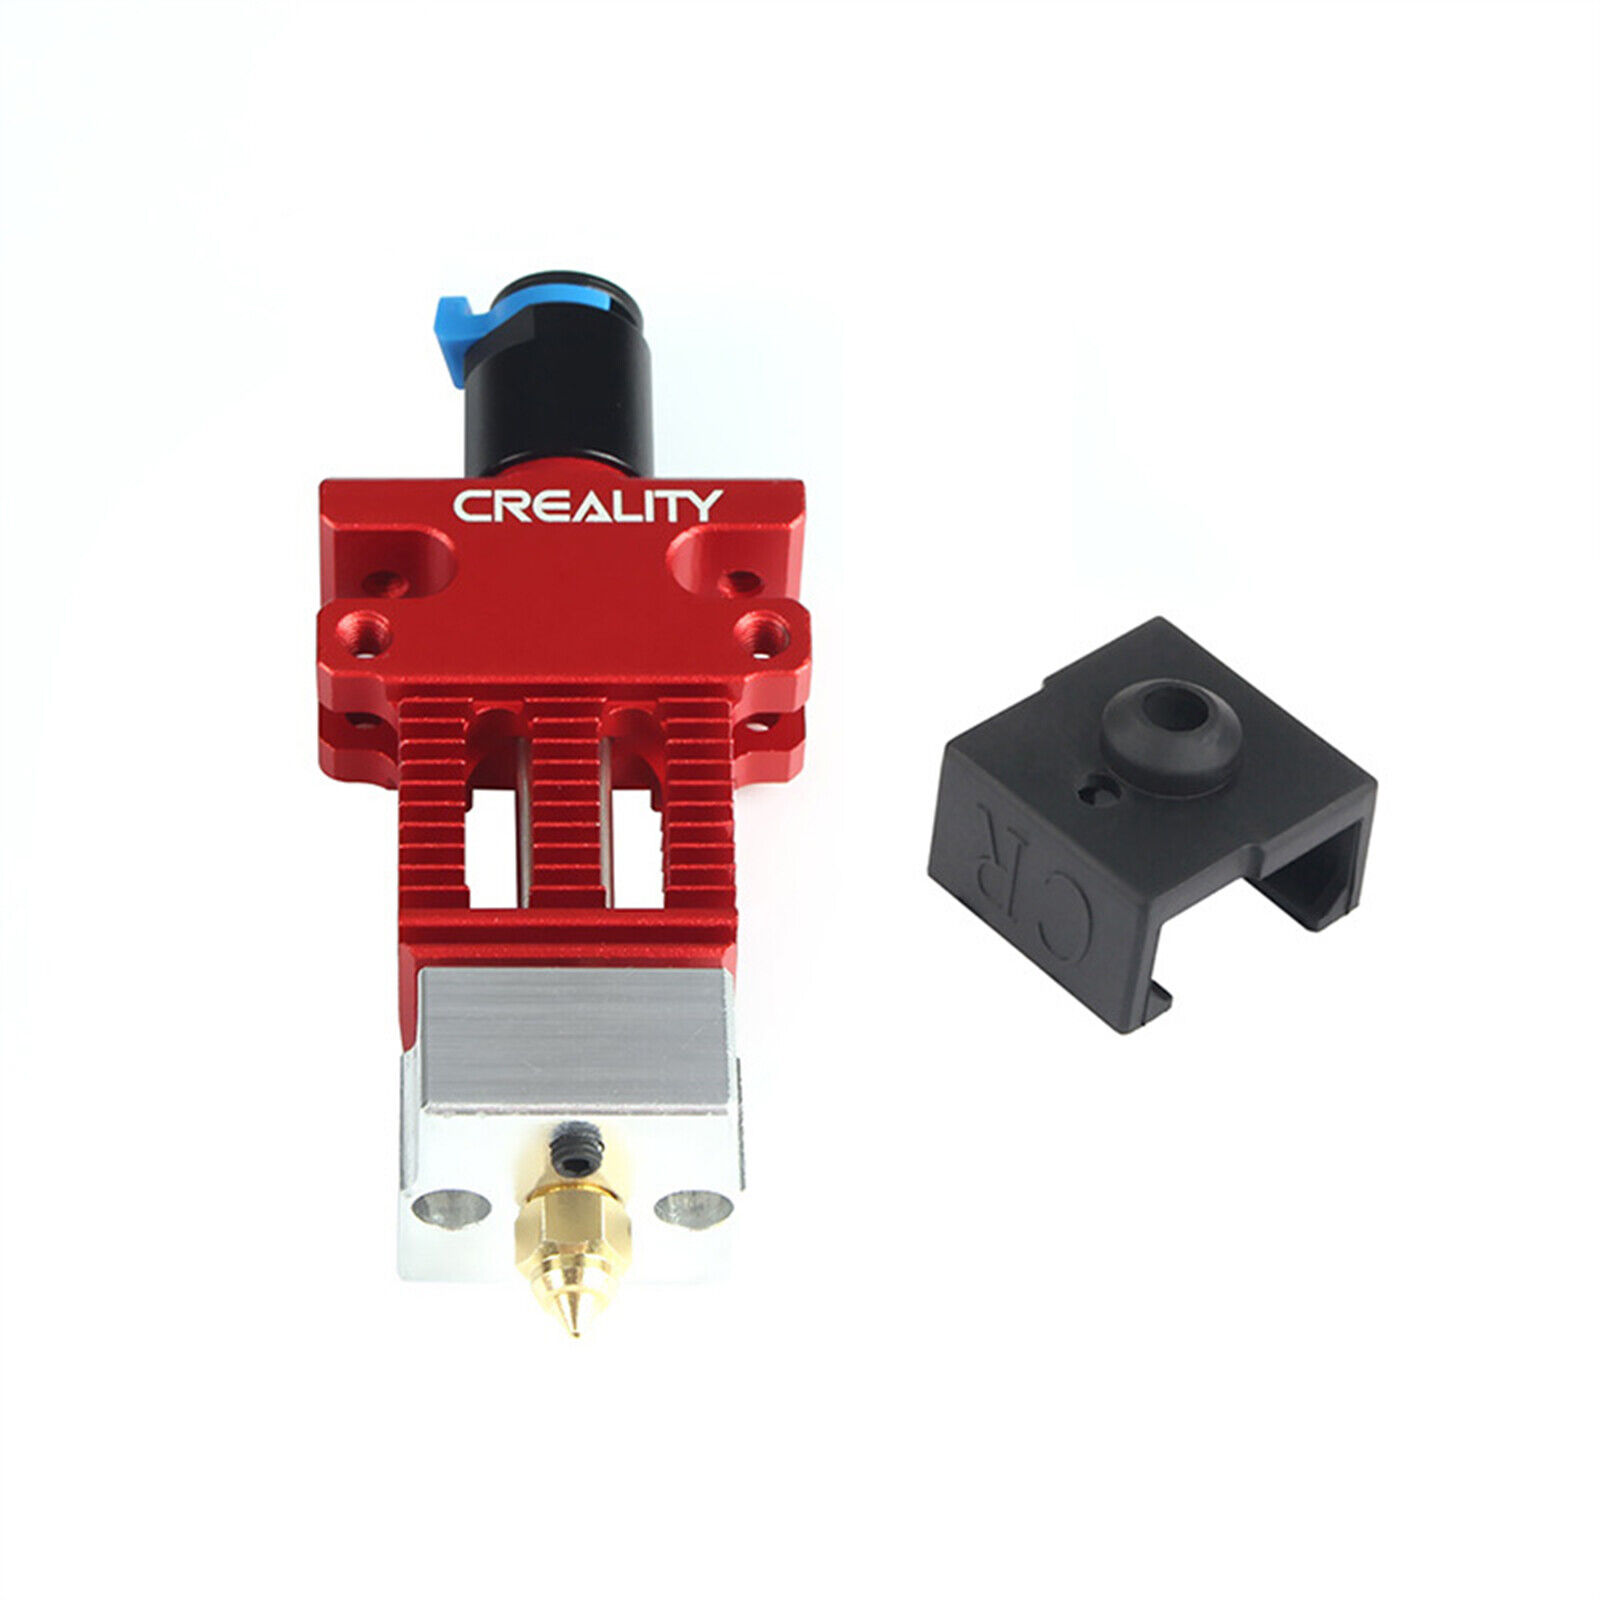 1.75mm Hotend Extruder Nozzle Kit for Creality CR-6 SE CR-5 PRO 3D Printer ##